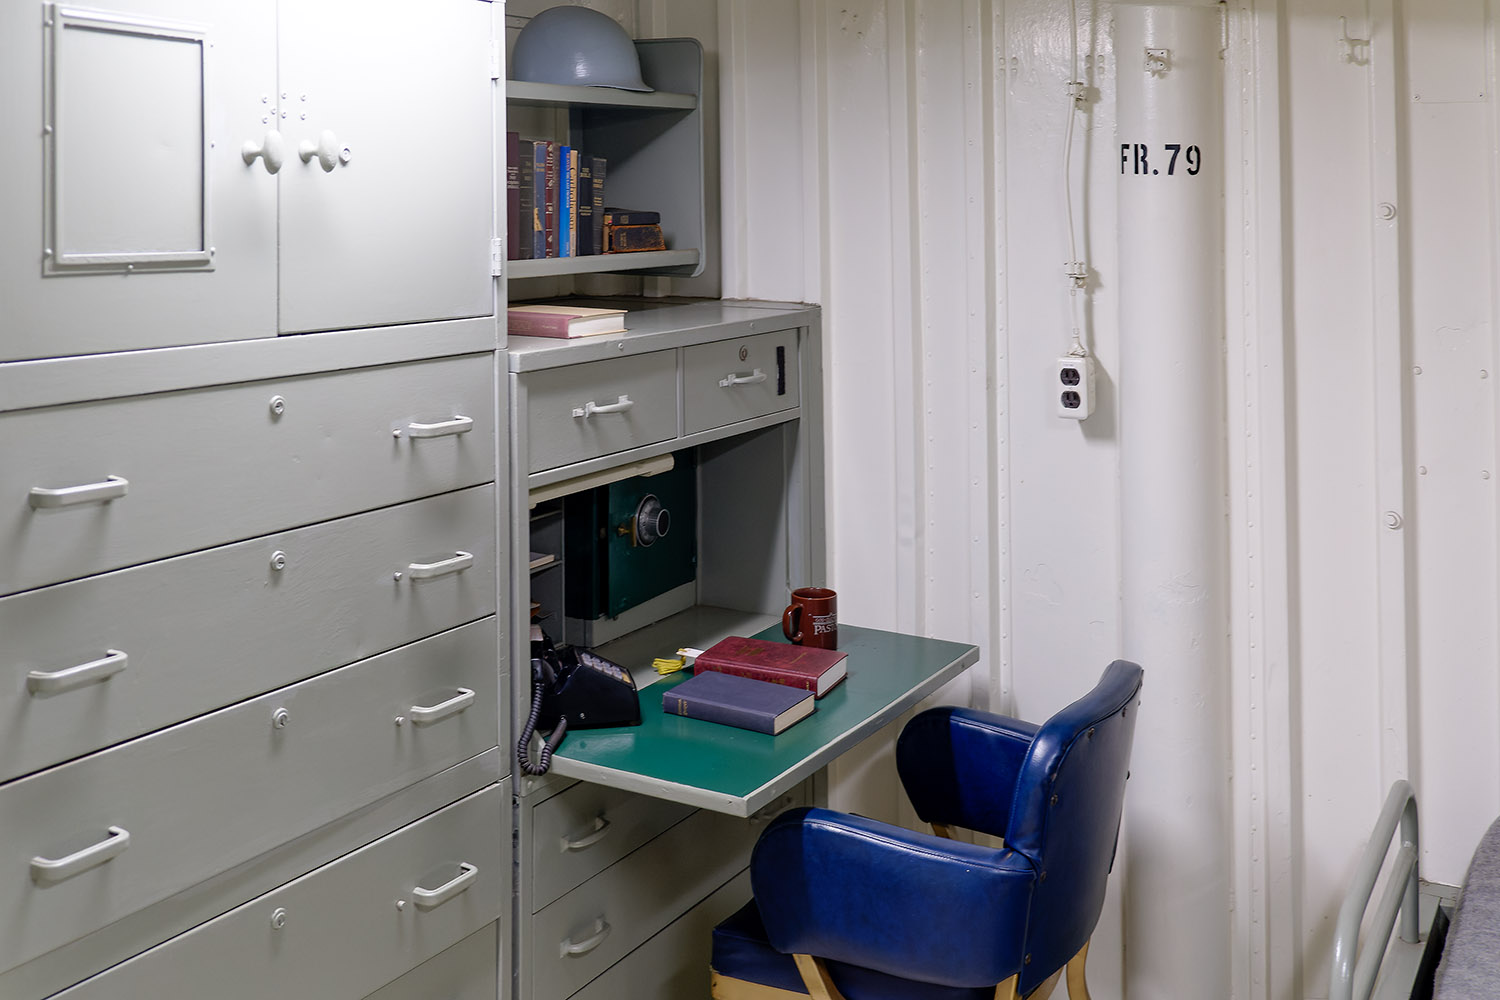 The Command Chaplain's cabin